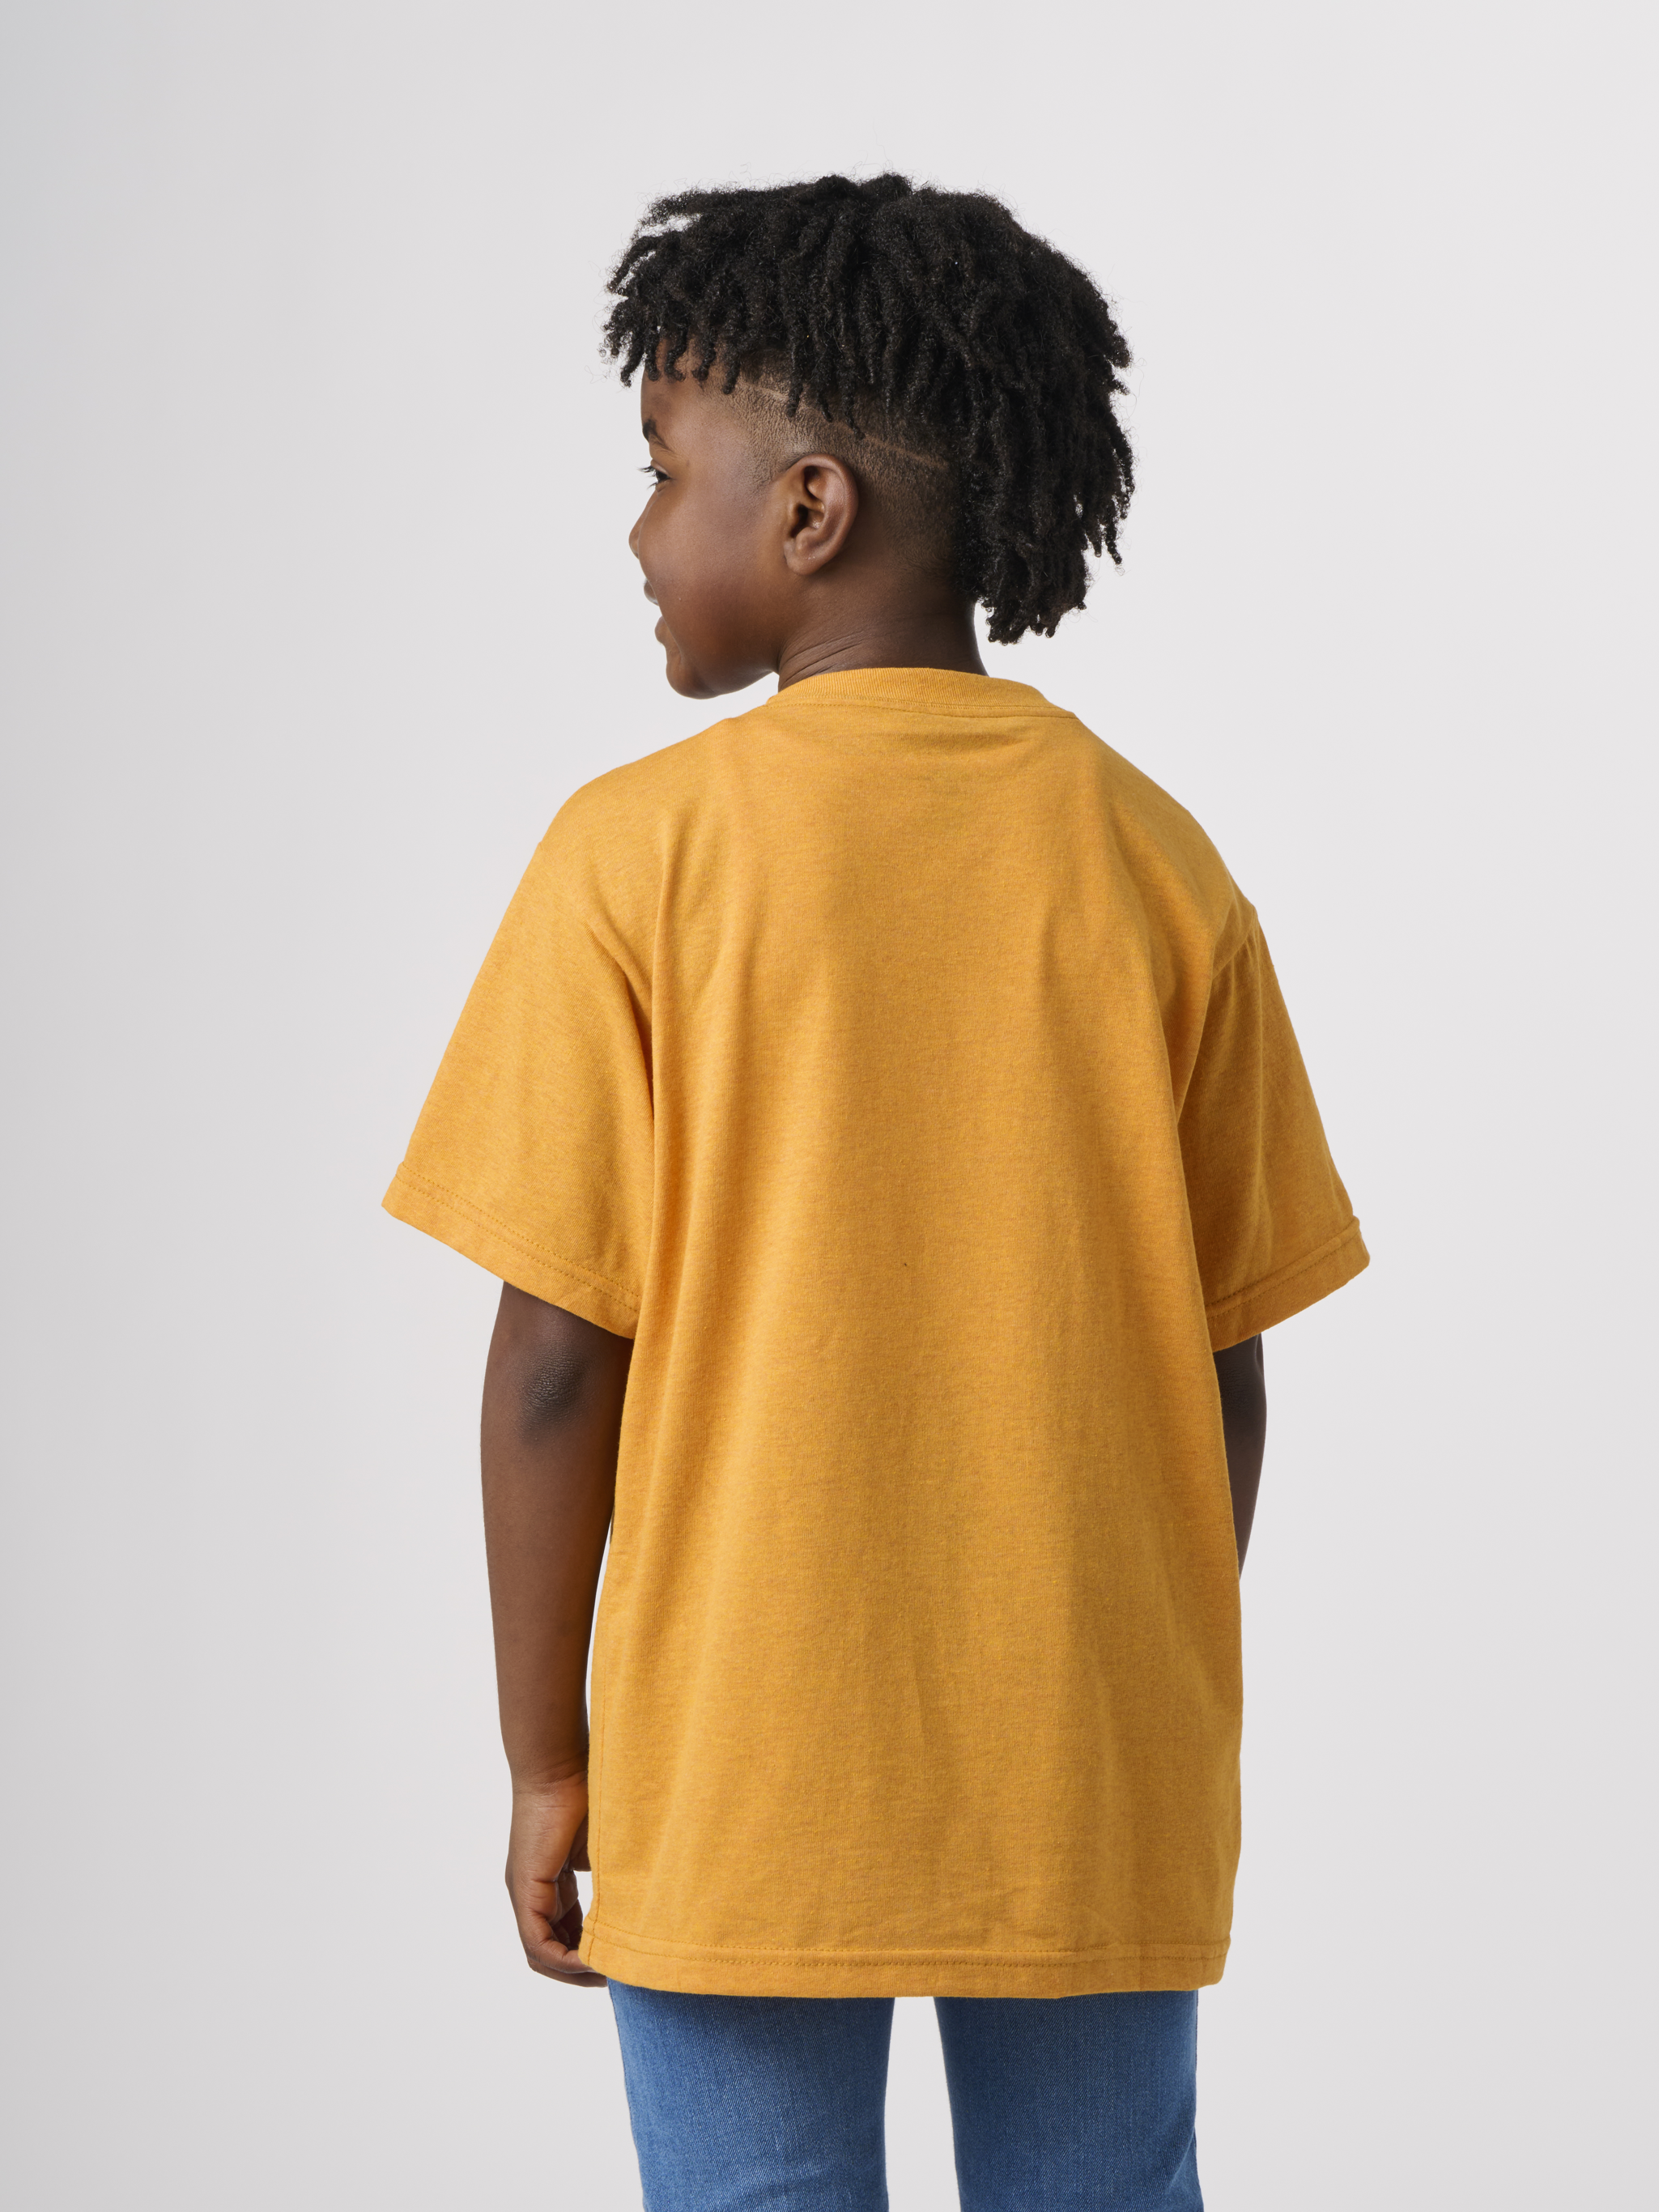 RECOVER_RY100_YOUTHCLASSICSHORTSLEEVETSHIRT_FIRE_BACK.png